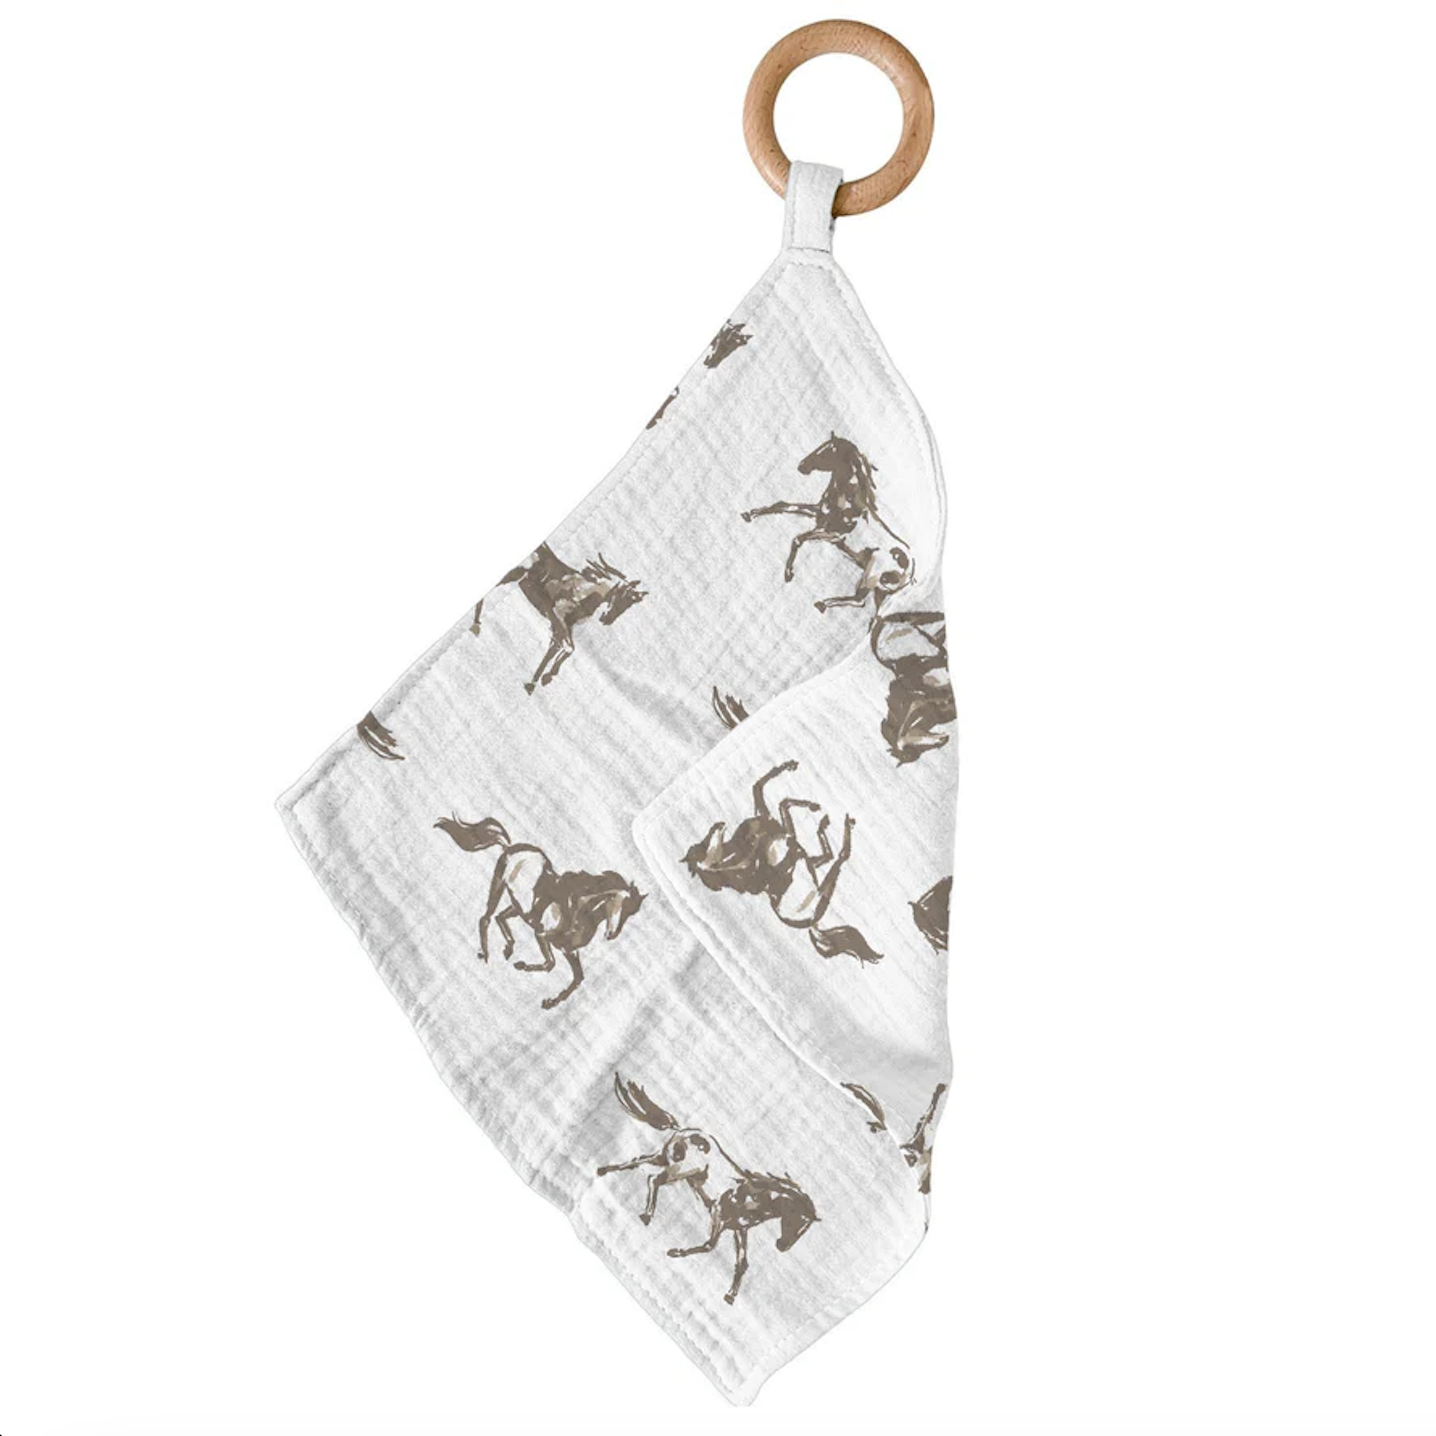 Newcastle Classics Galloping Teether